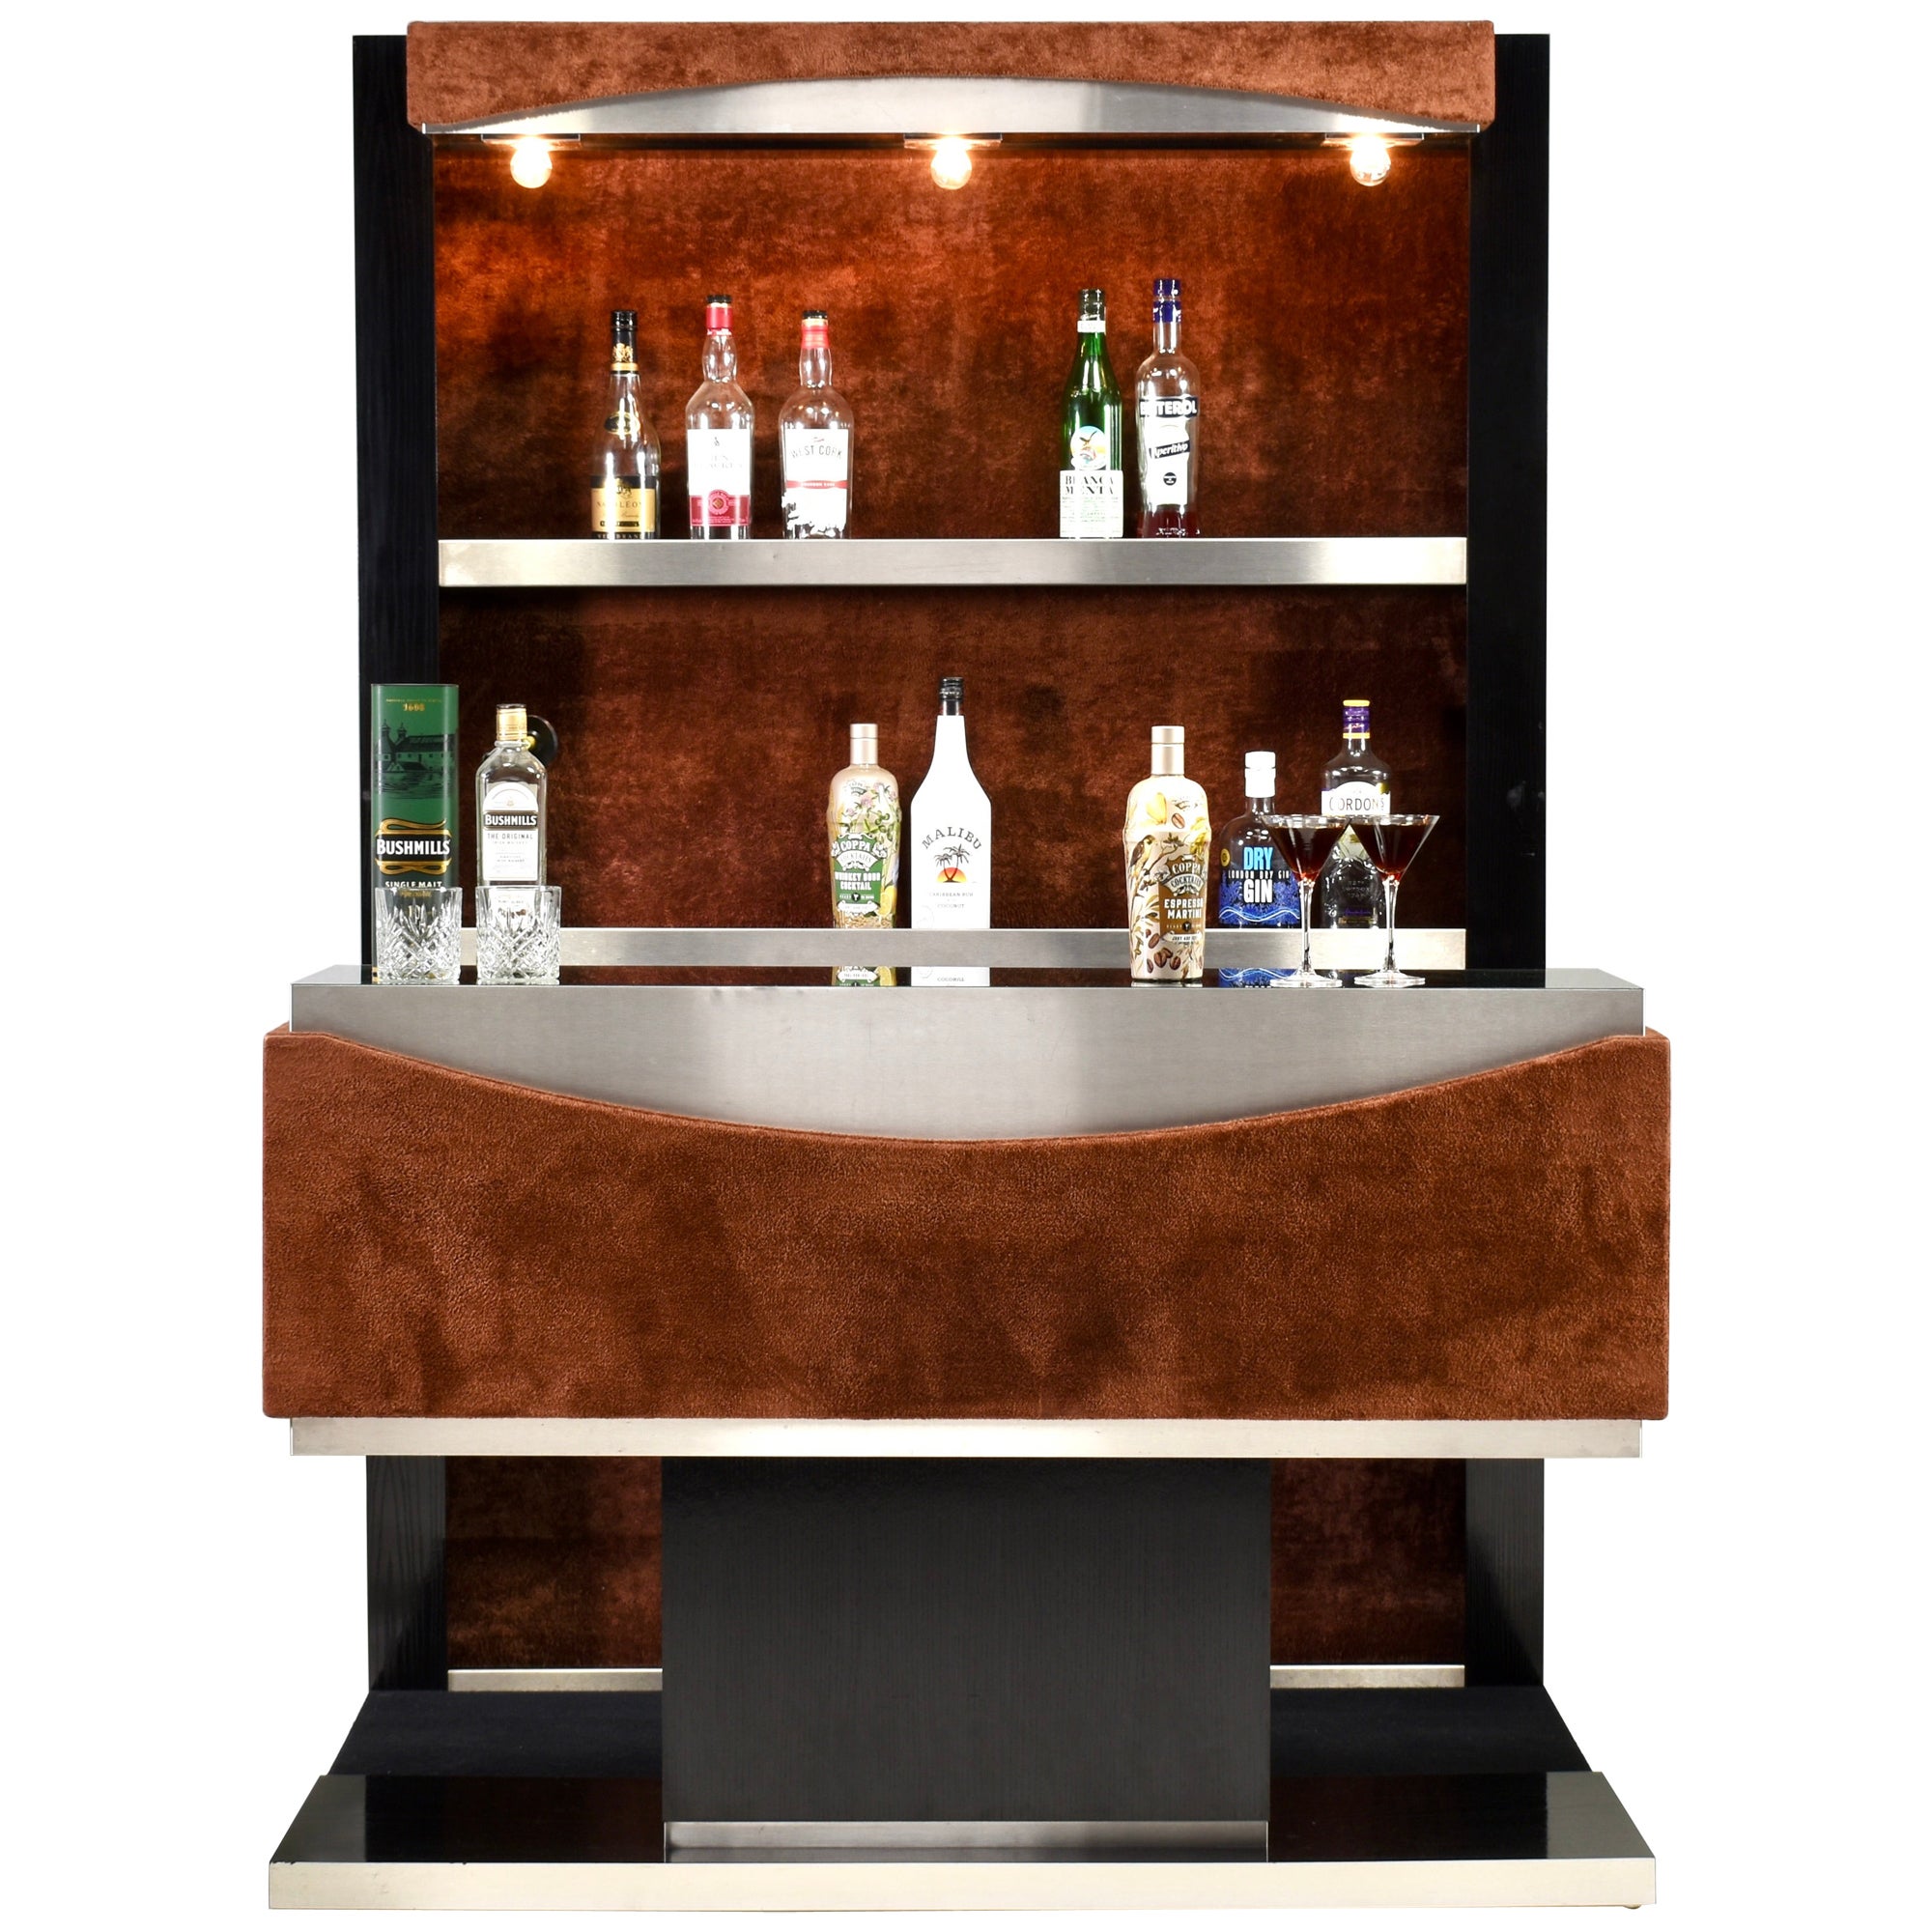 StunningItalian Cocktail Dry Bar Cabinet in the style of Willy Rizzo – 1970